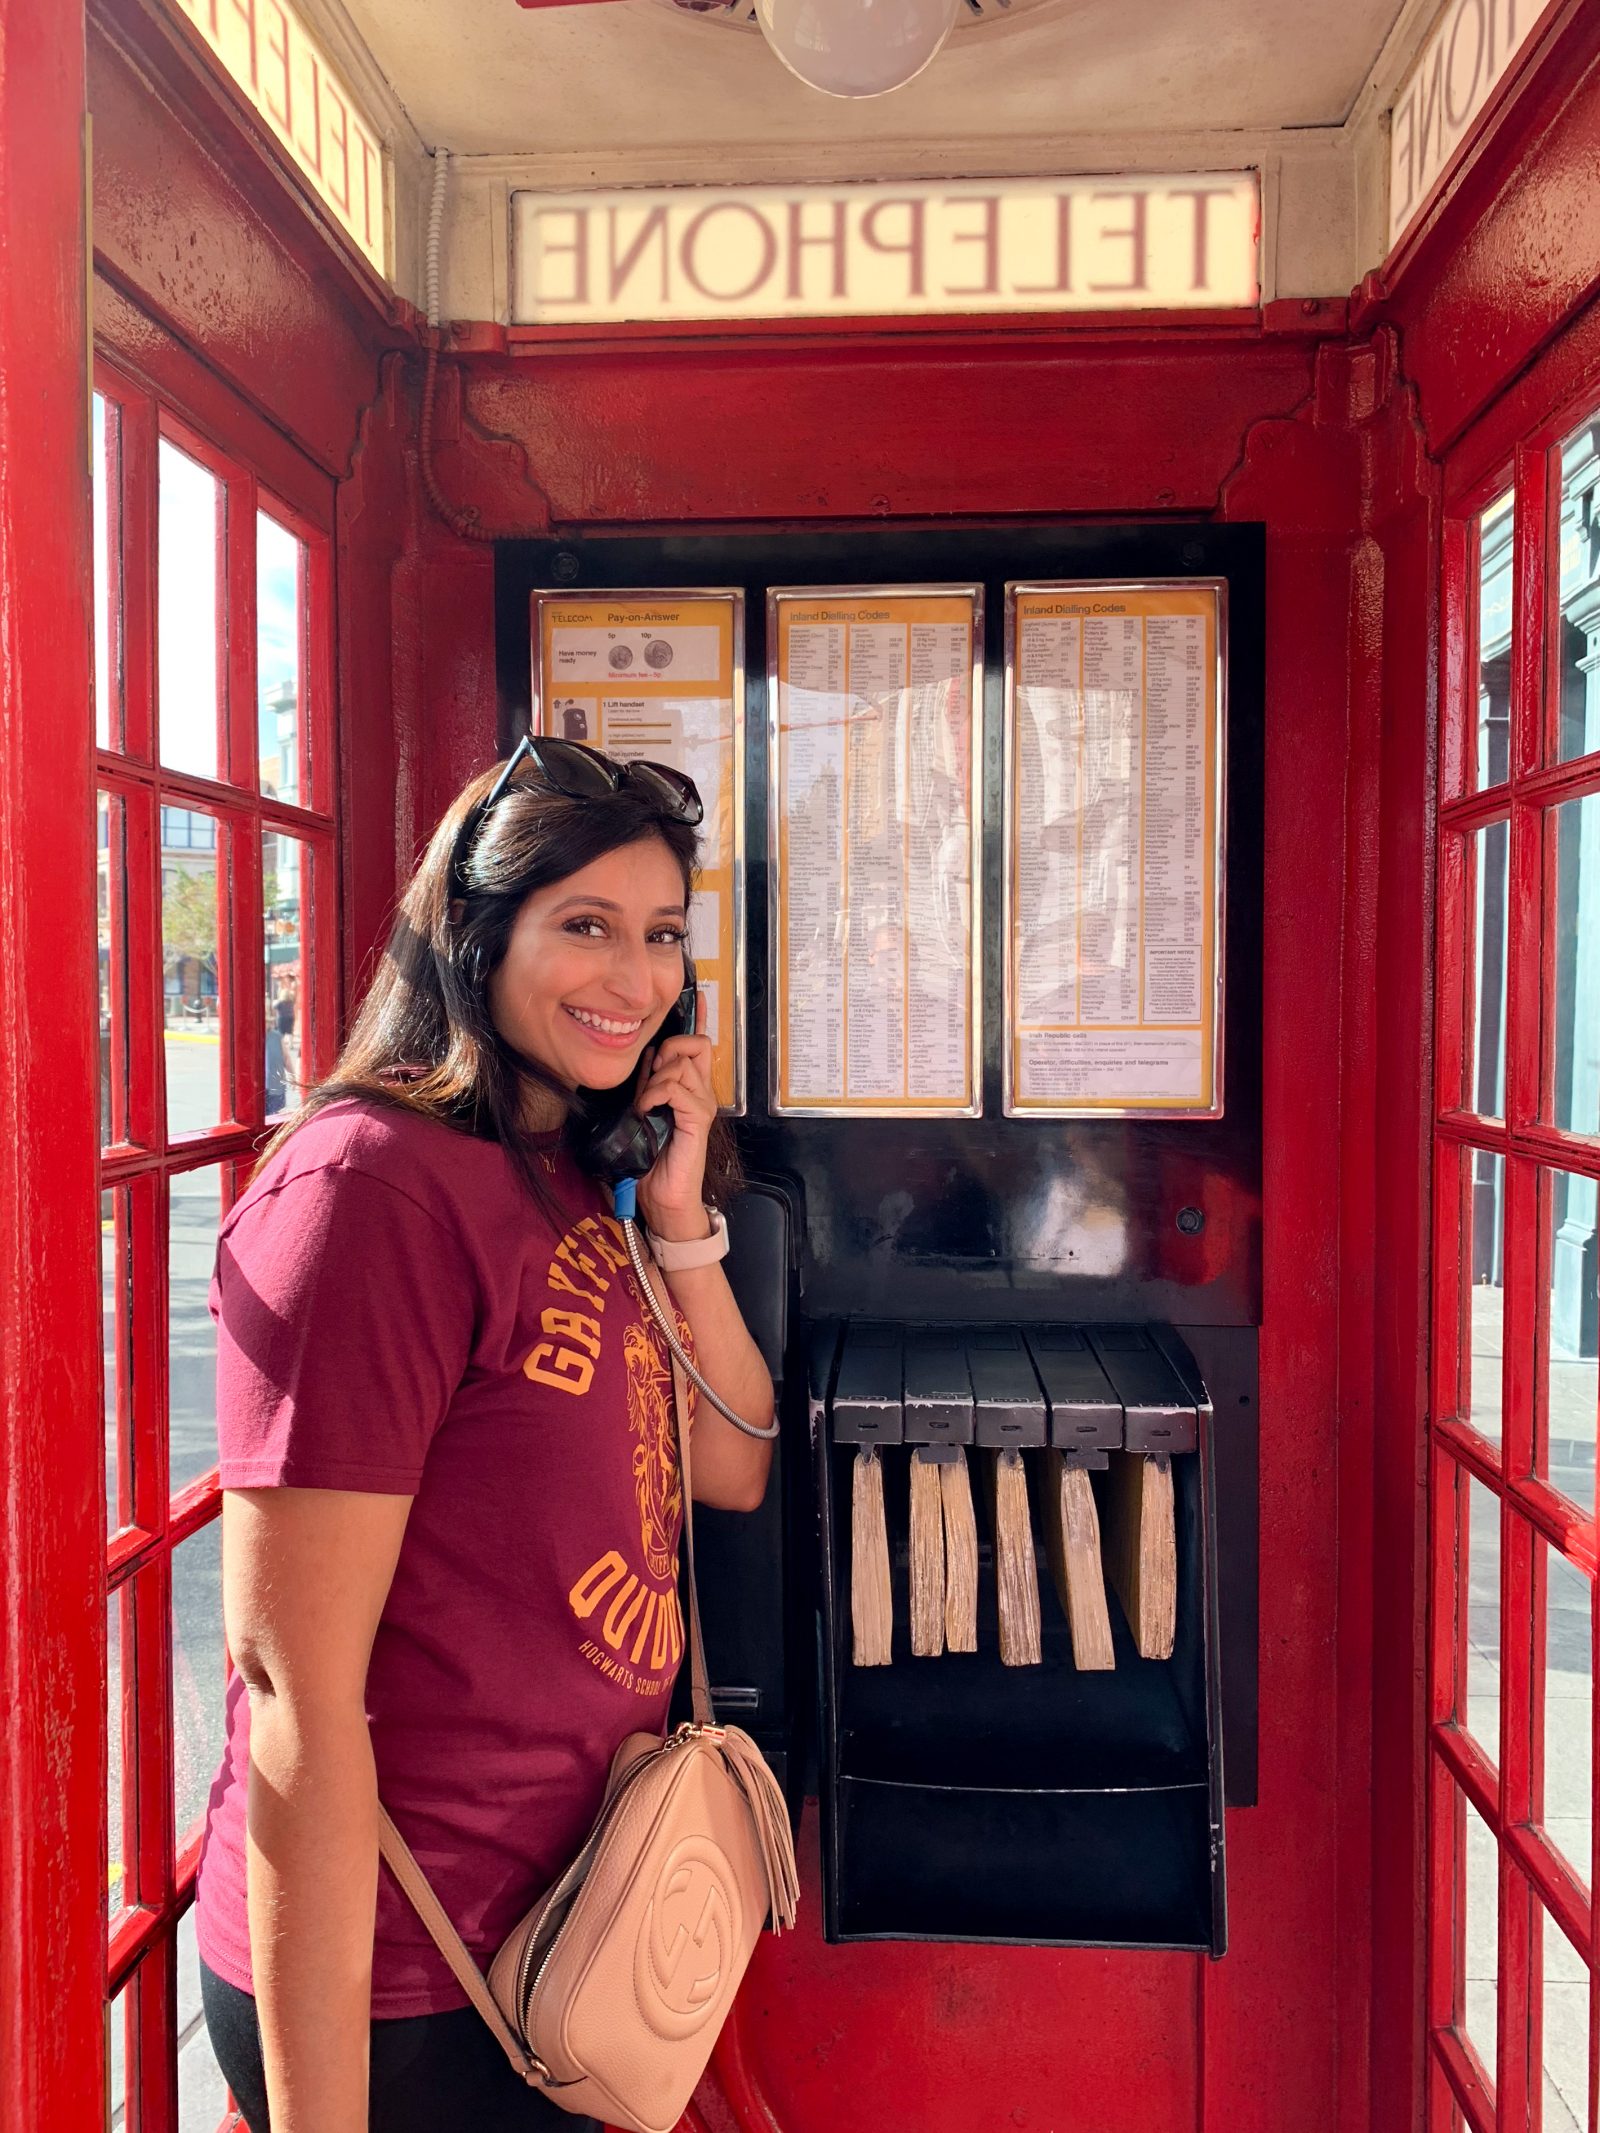 dialing the ministry at the Wizarding World of Harry Potter 